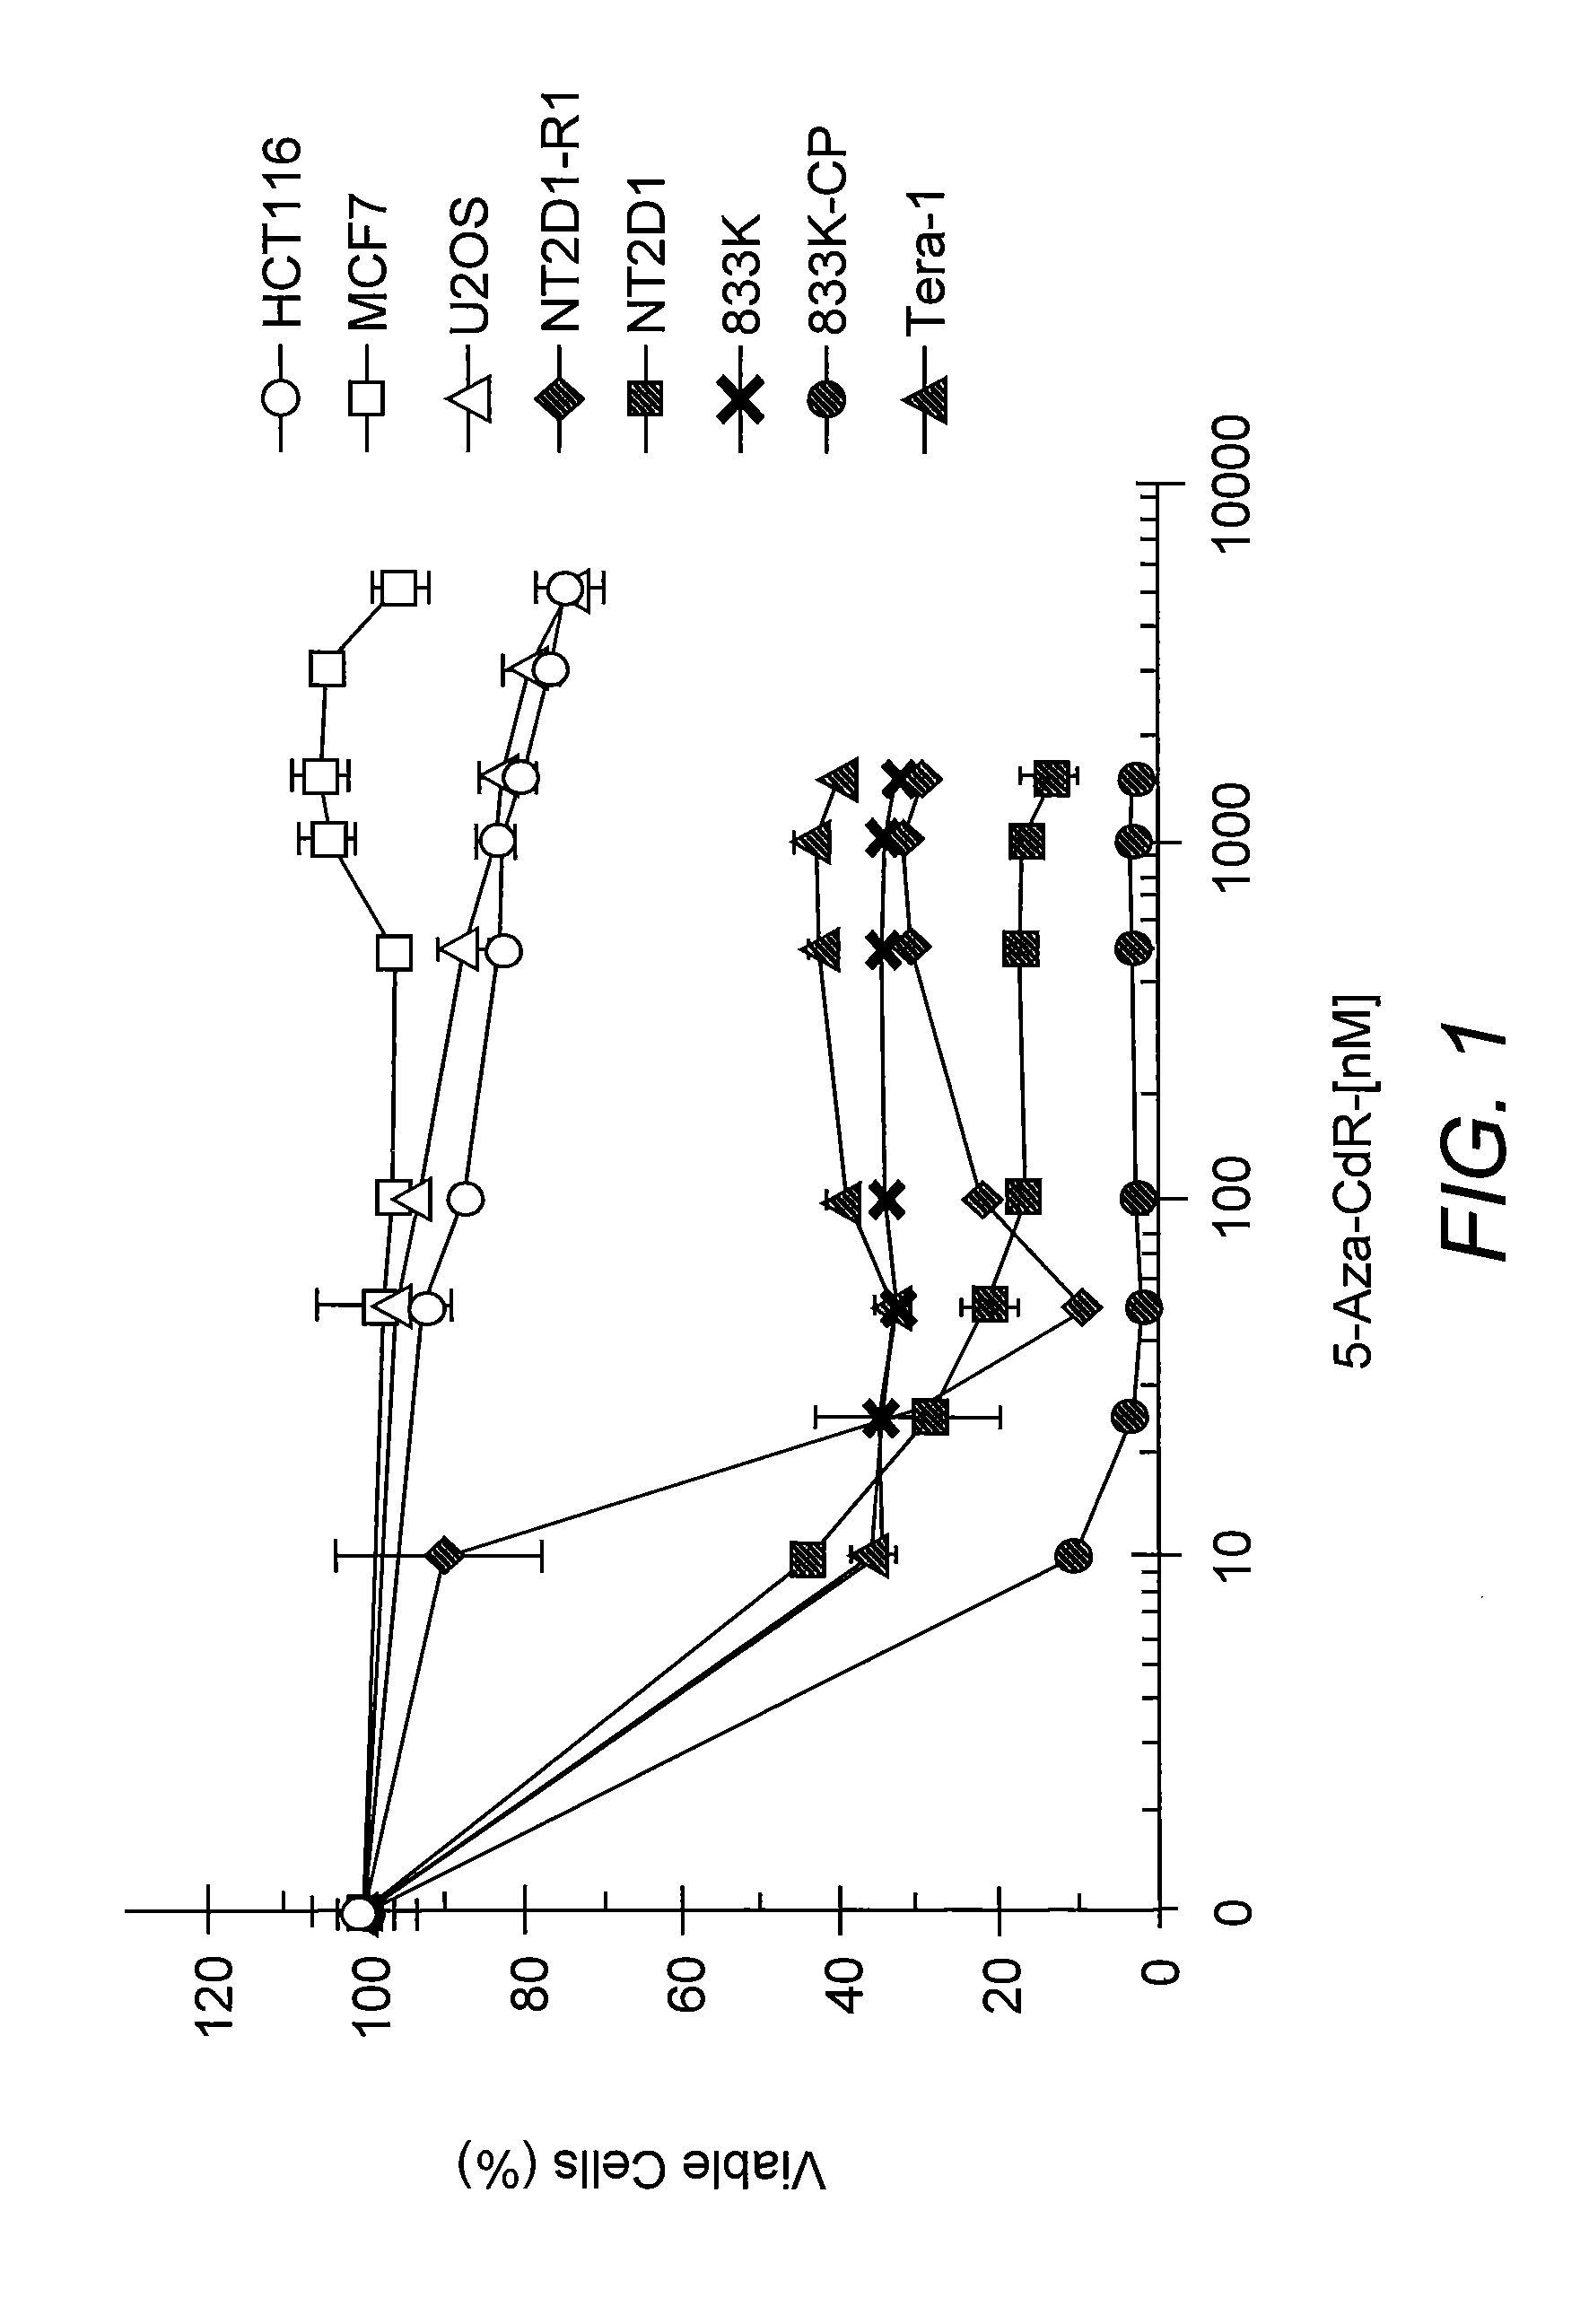 Compositions for Inhibiting Growth of Cancer Stem Cells